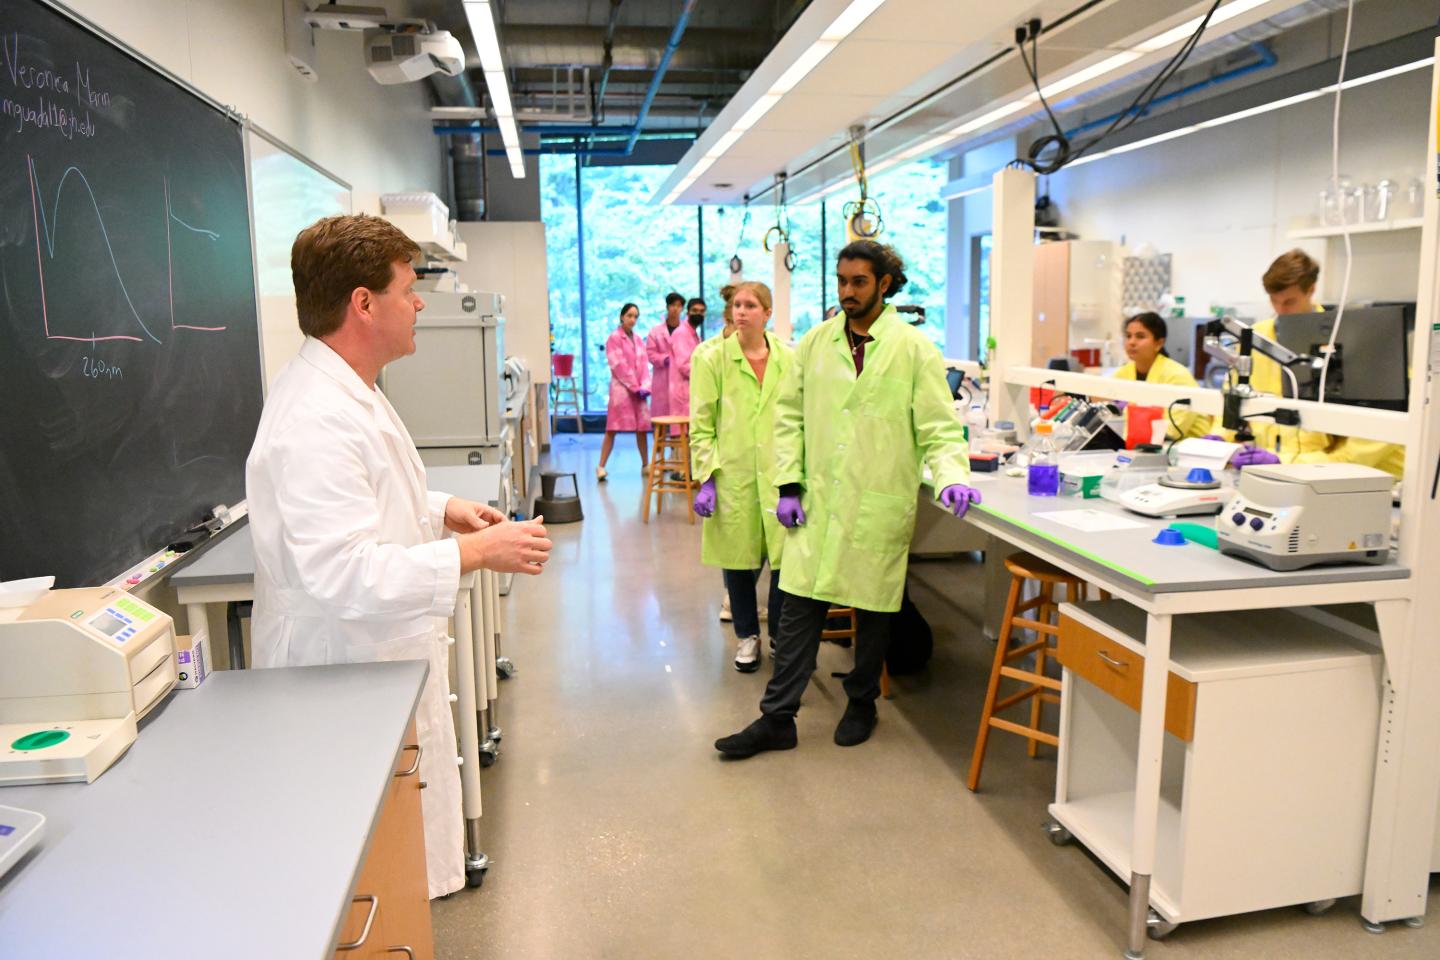 An instructor in a white lab coat addresses a class in a lab setting